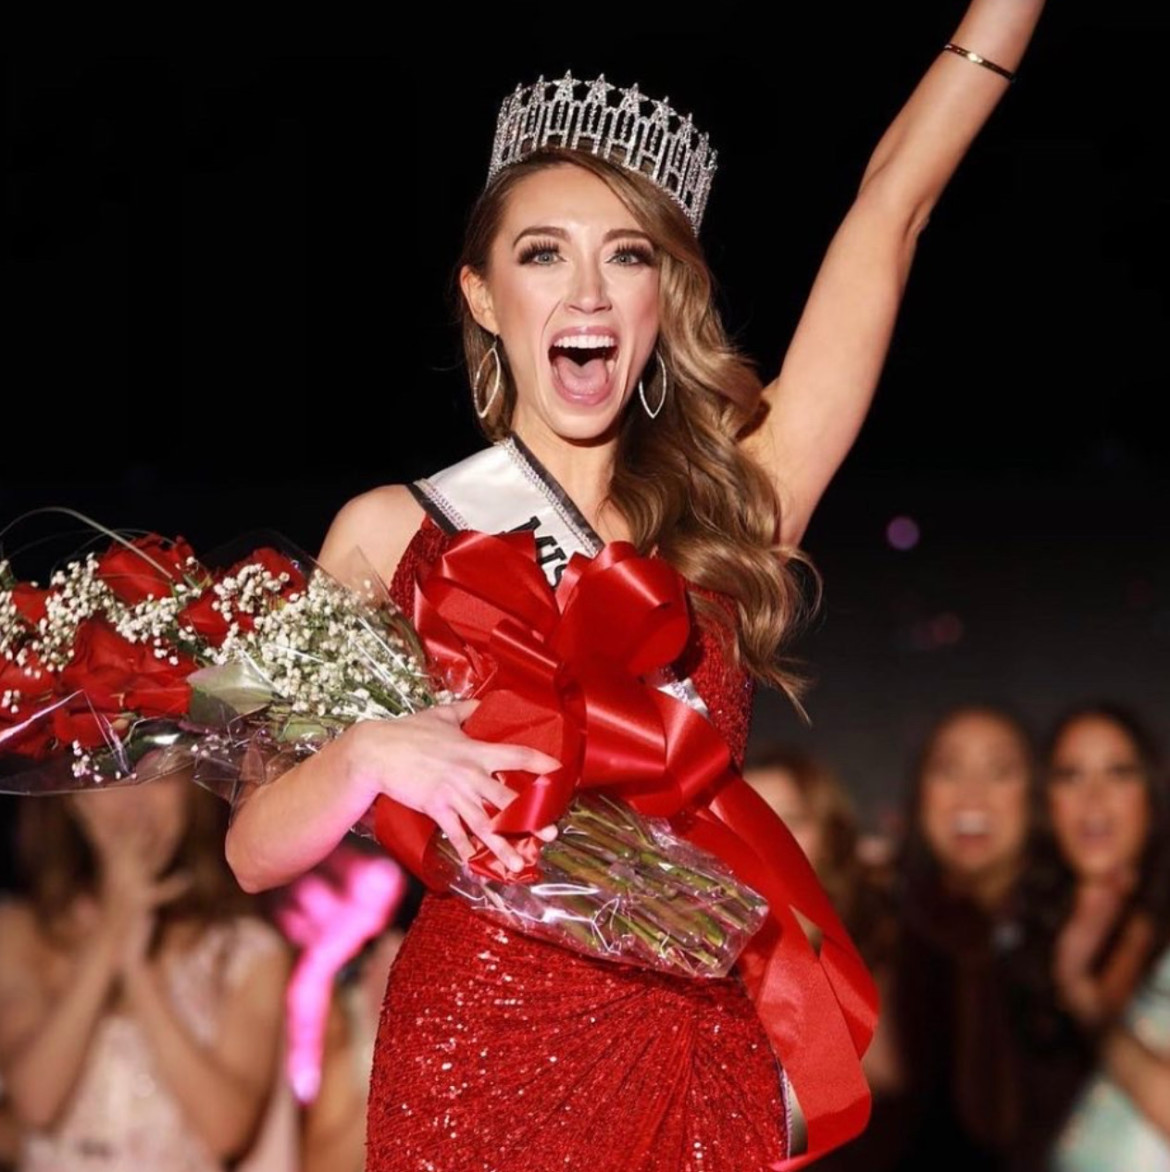 After 7 Years of Competing, Hoboken Resident Crowned Miss NJ USA